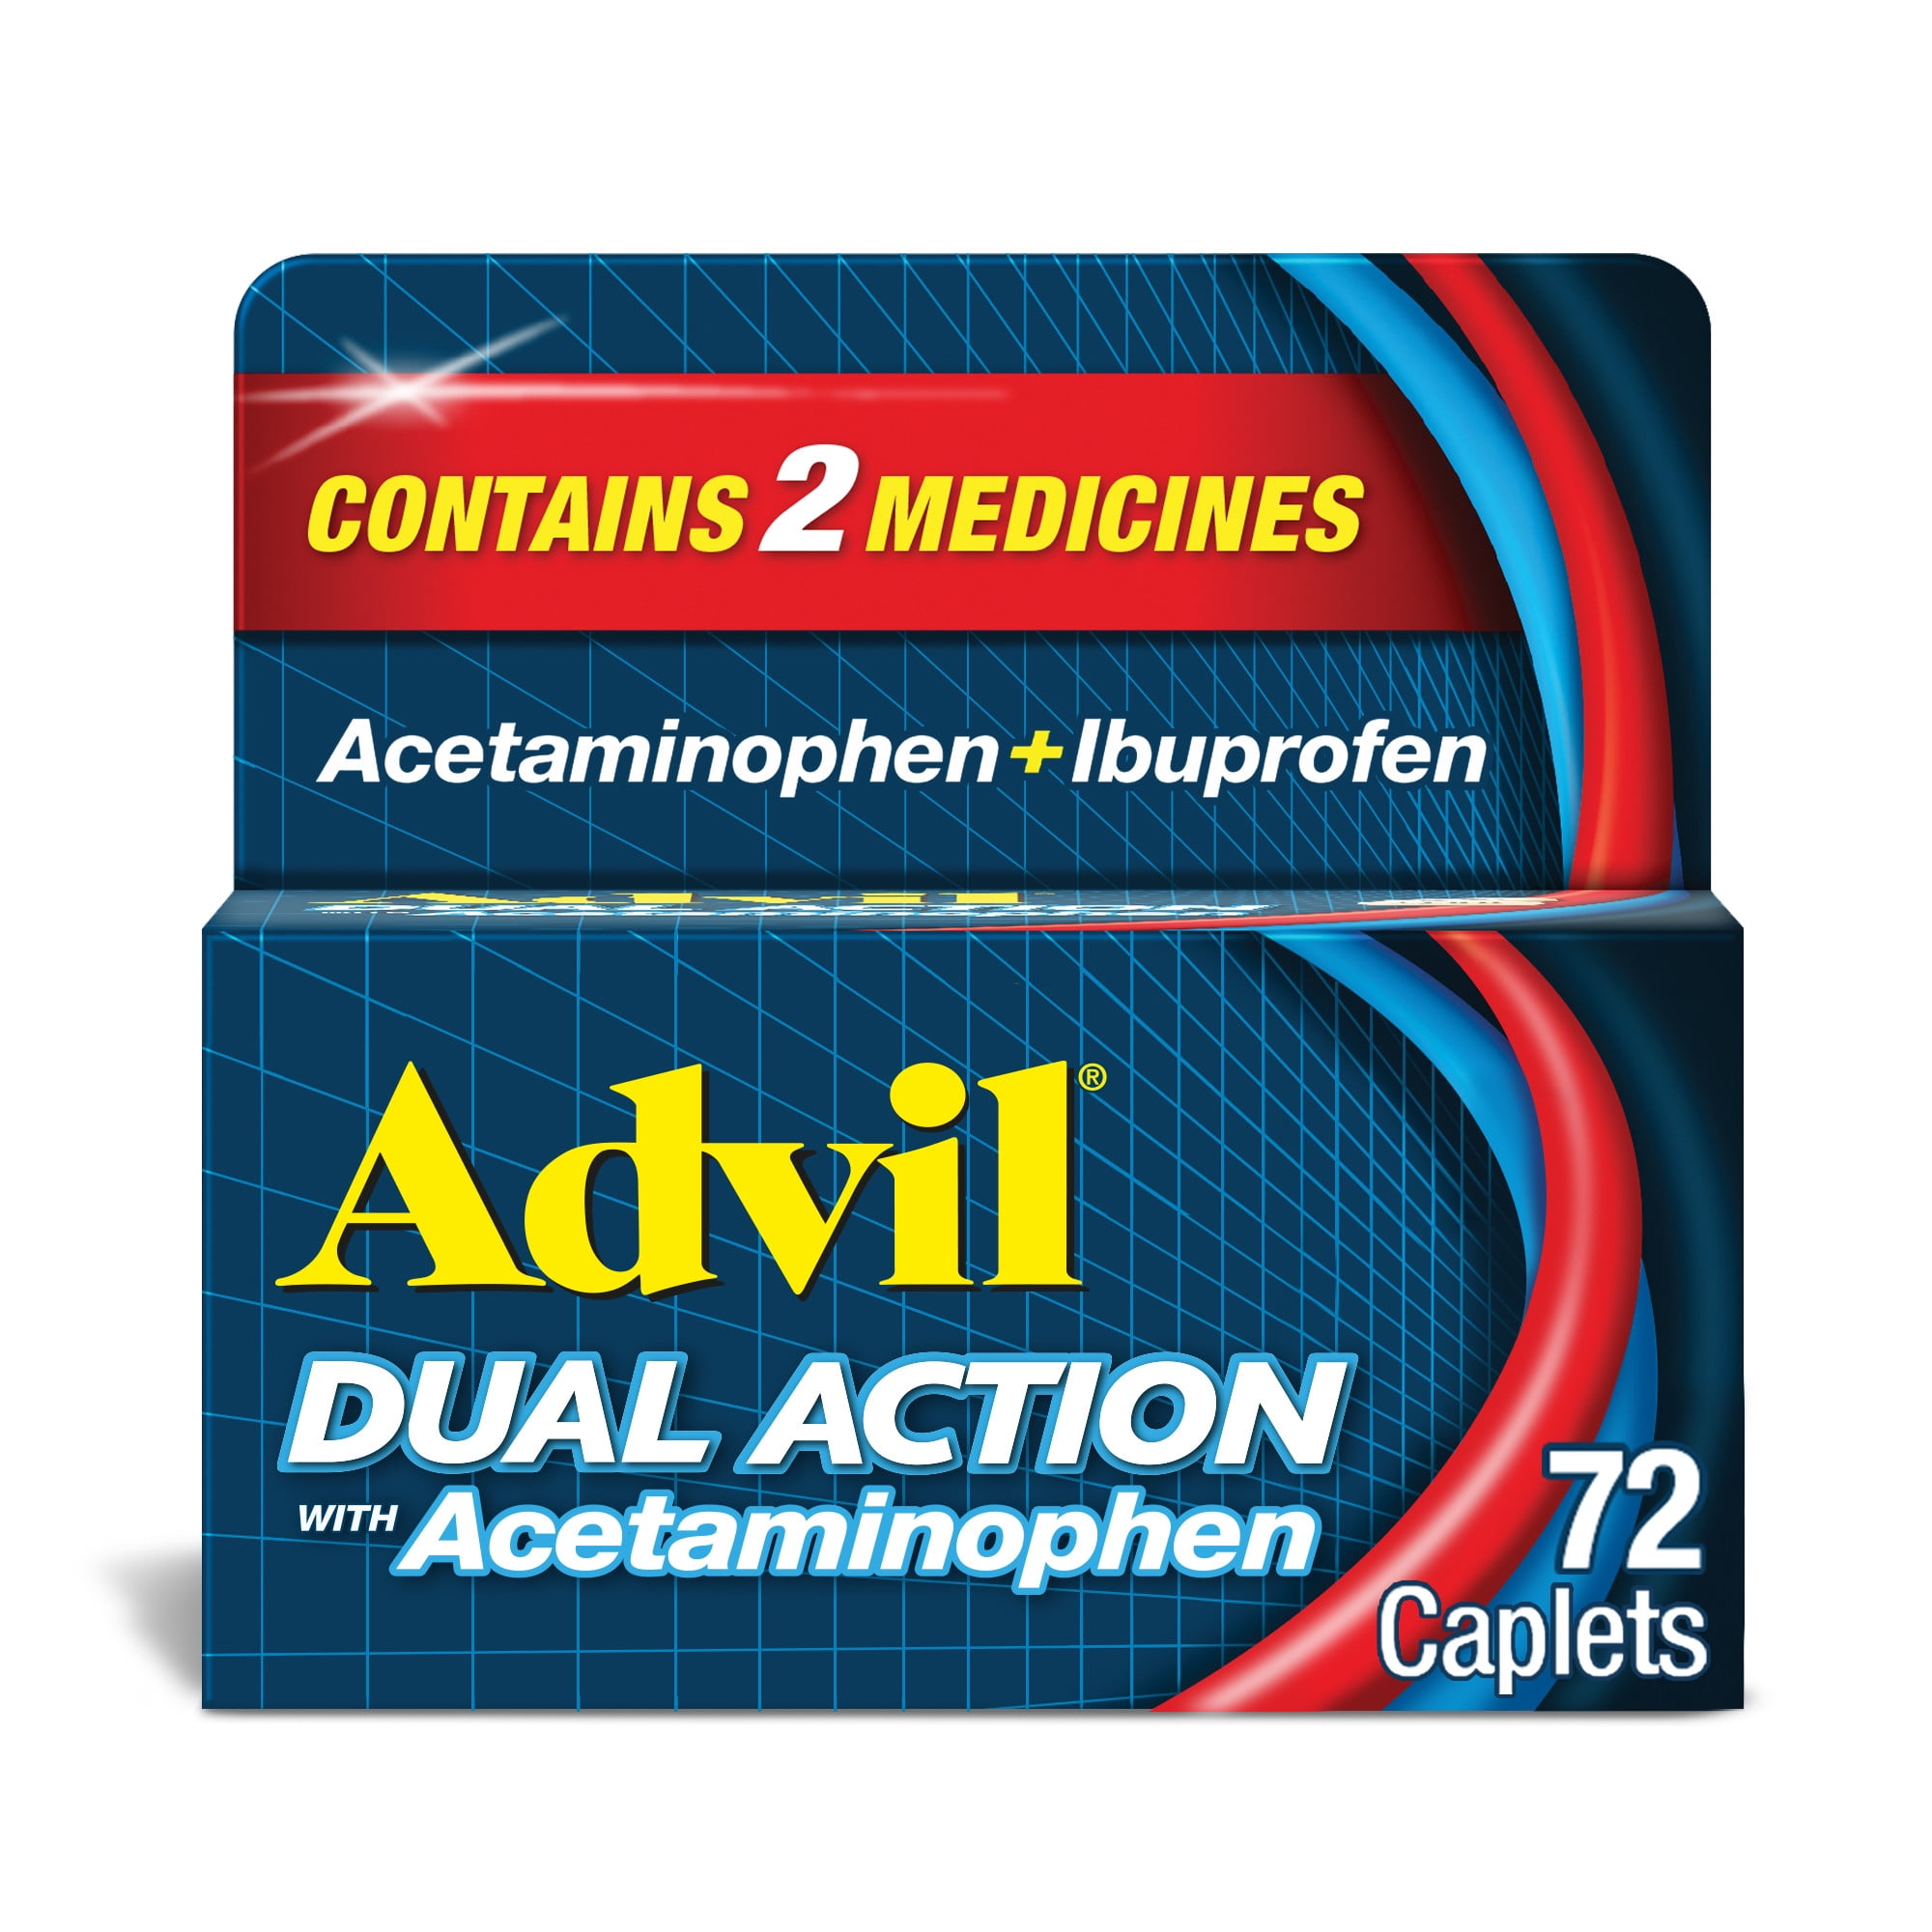 Advil Dual Action With Acetaminophen Pain and Headache Reliever Ibuprofen, Coated Tablets, 72 Count